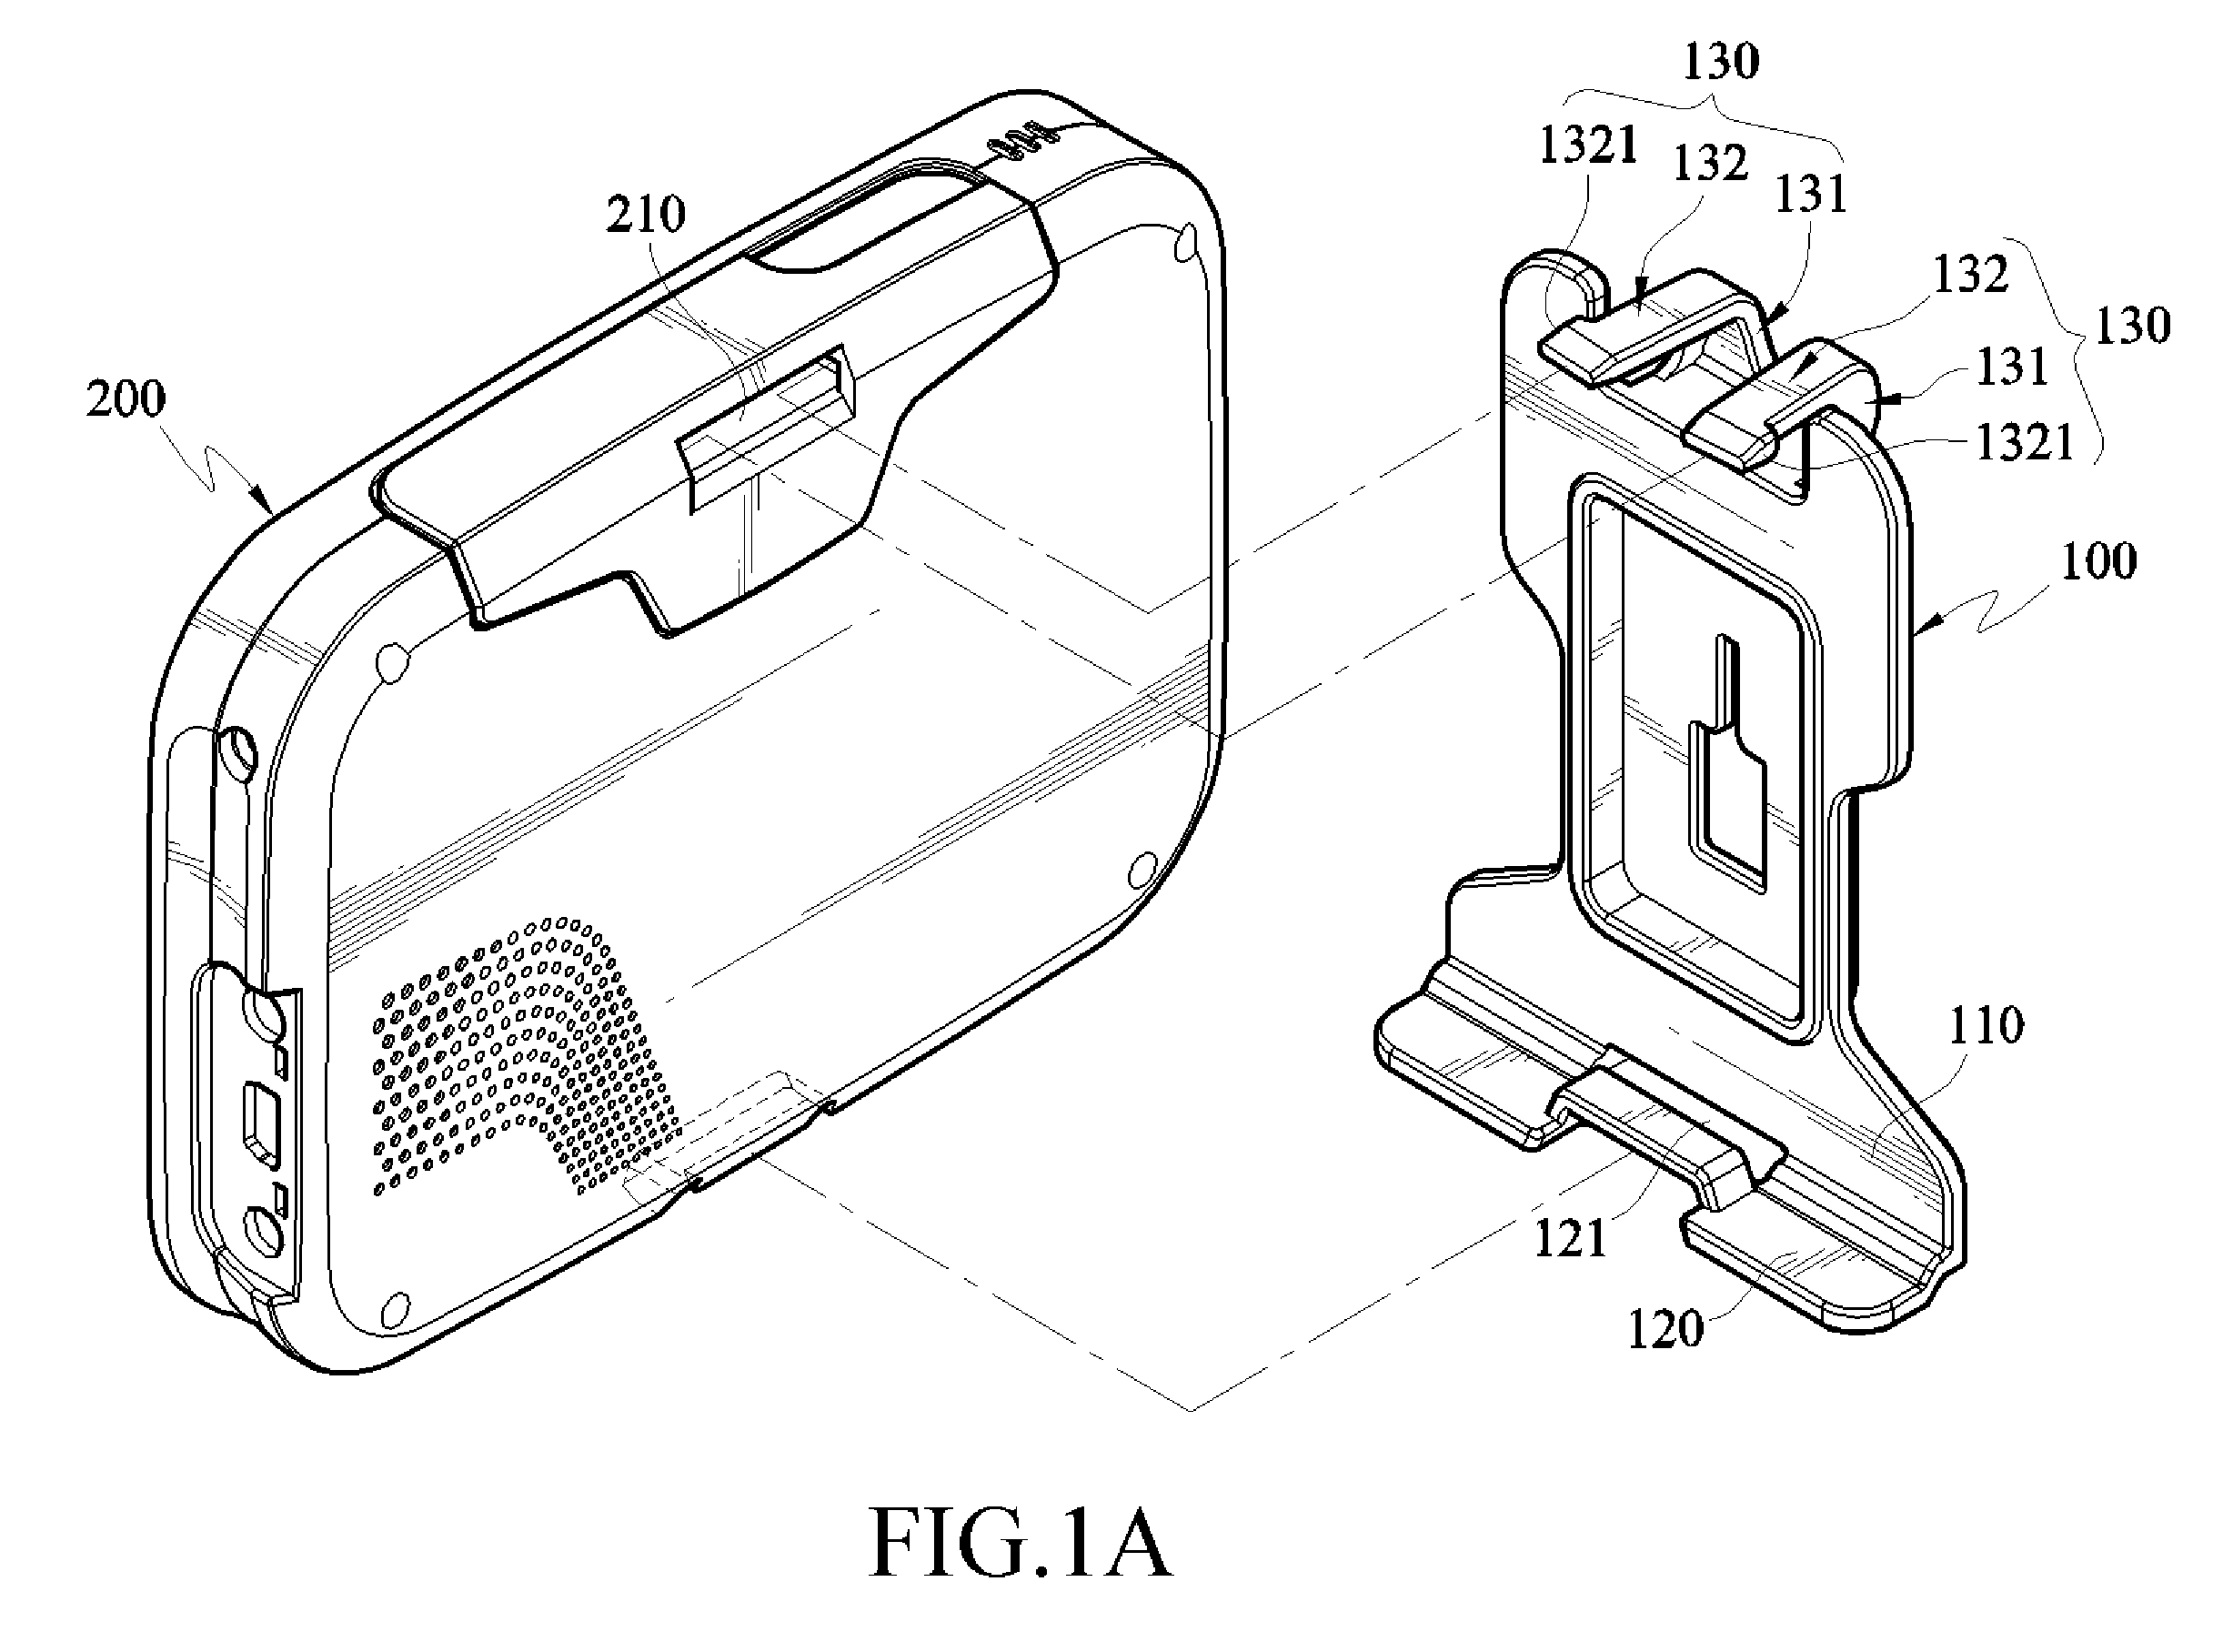 Holder for electronic device